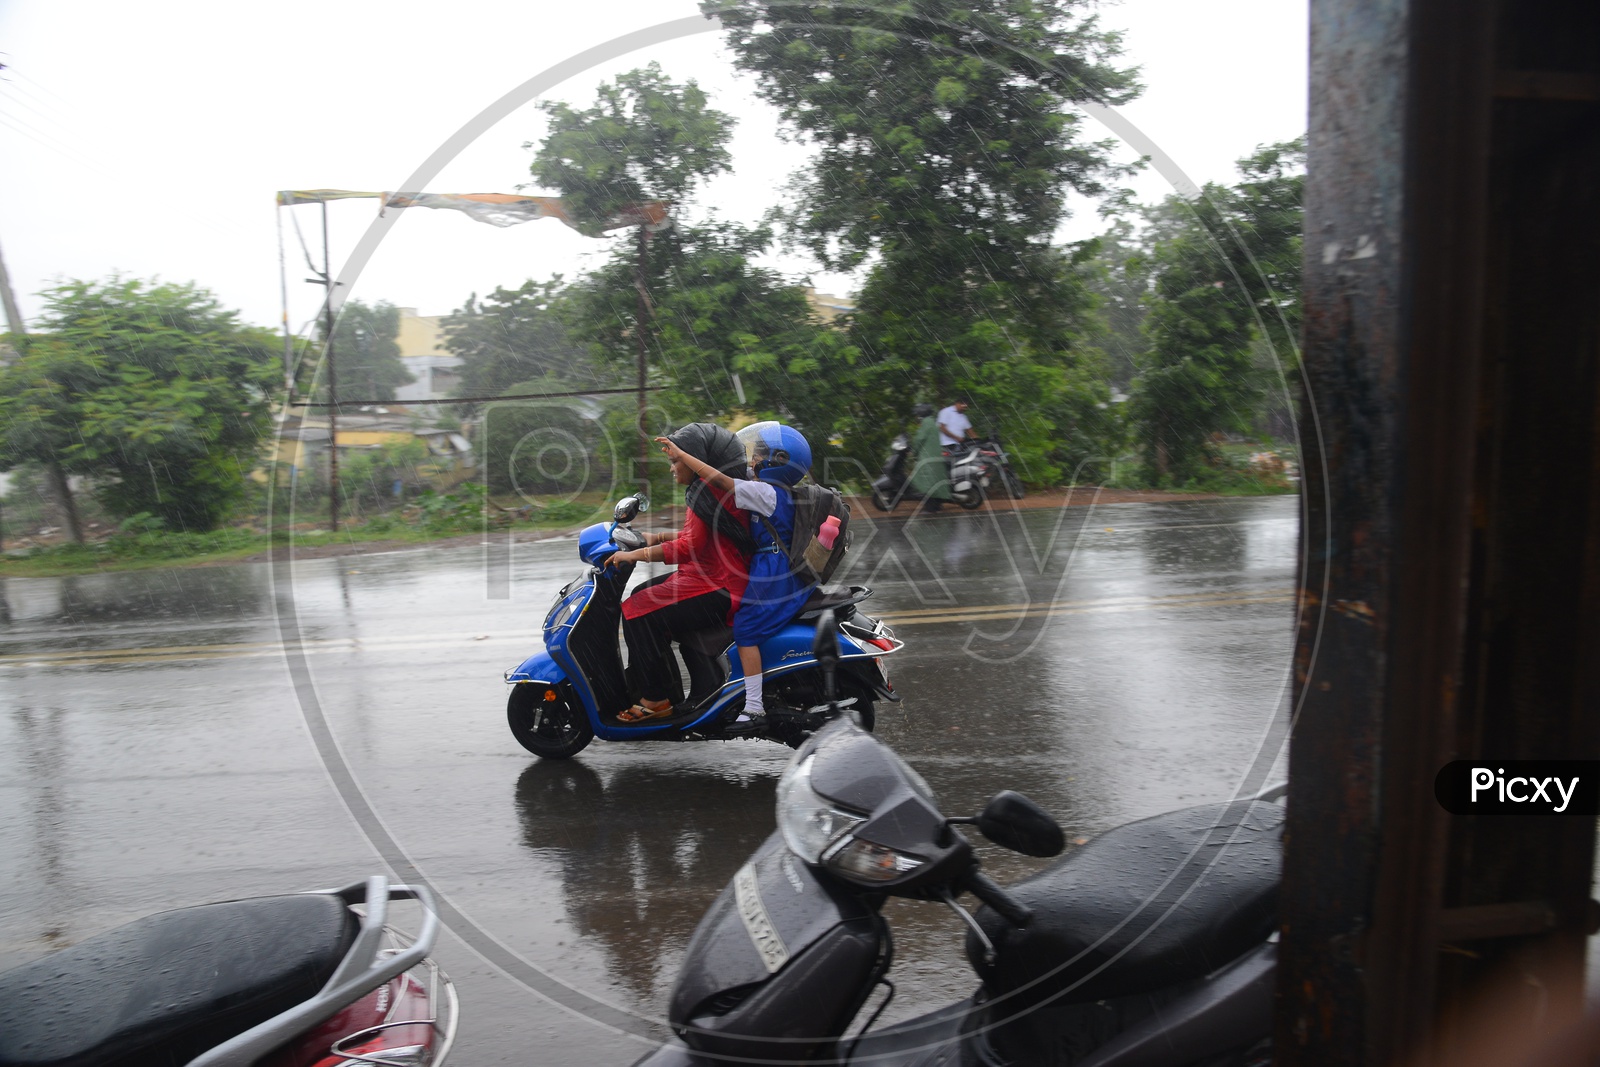 Mother and her daughter going on a Scooty on road during rain